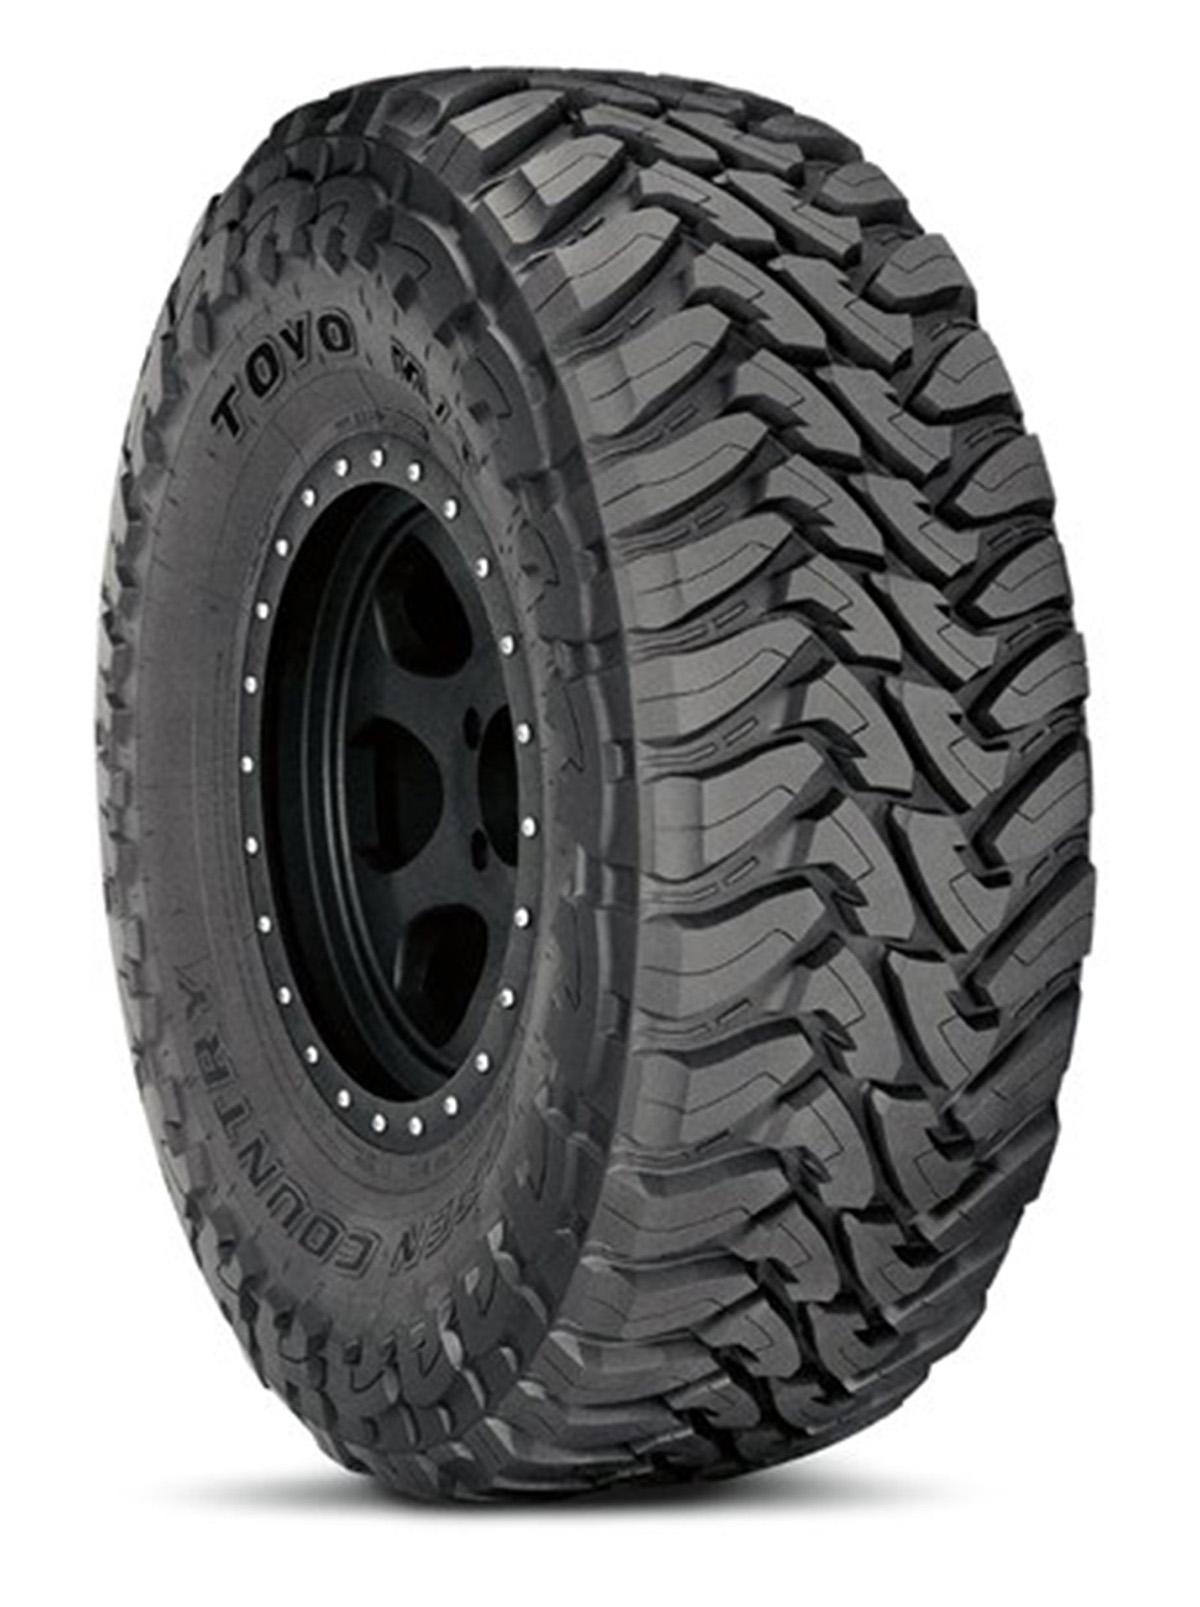 Toyo - OPEN COUNTRY MT  NW  295/70R17